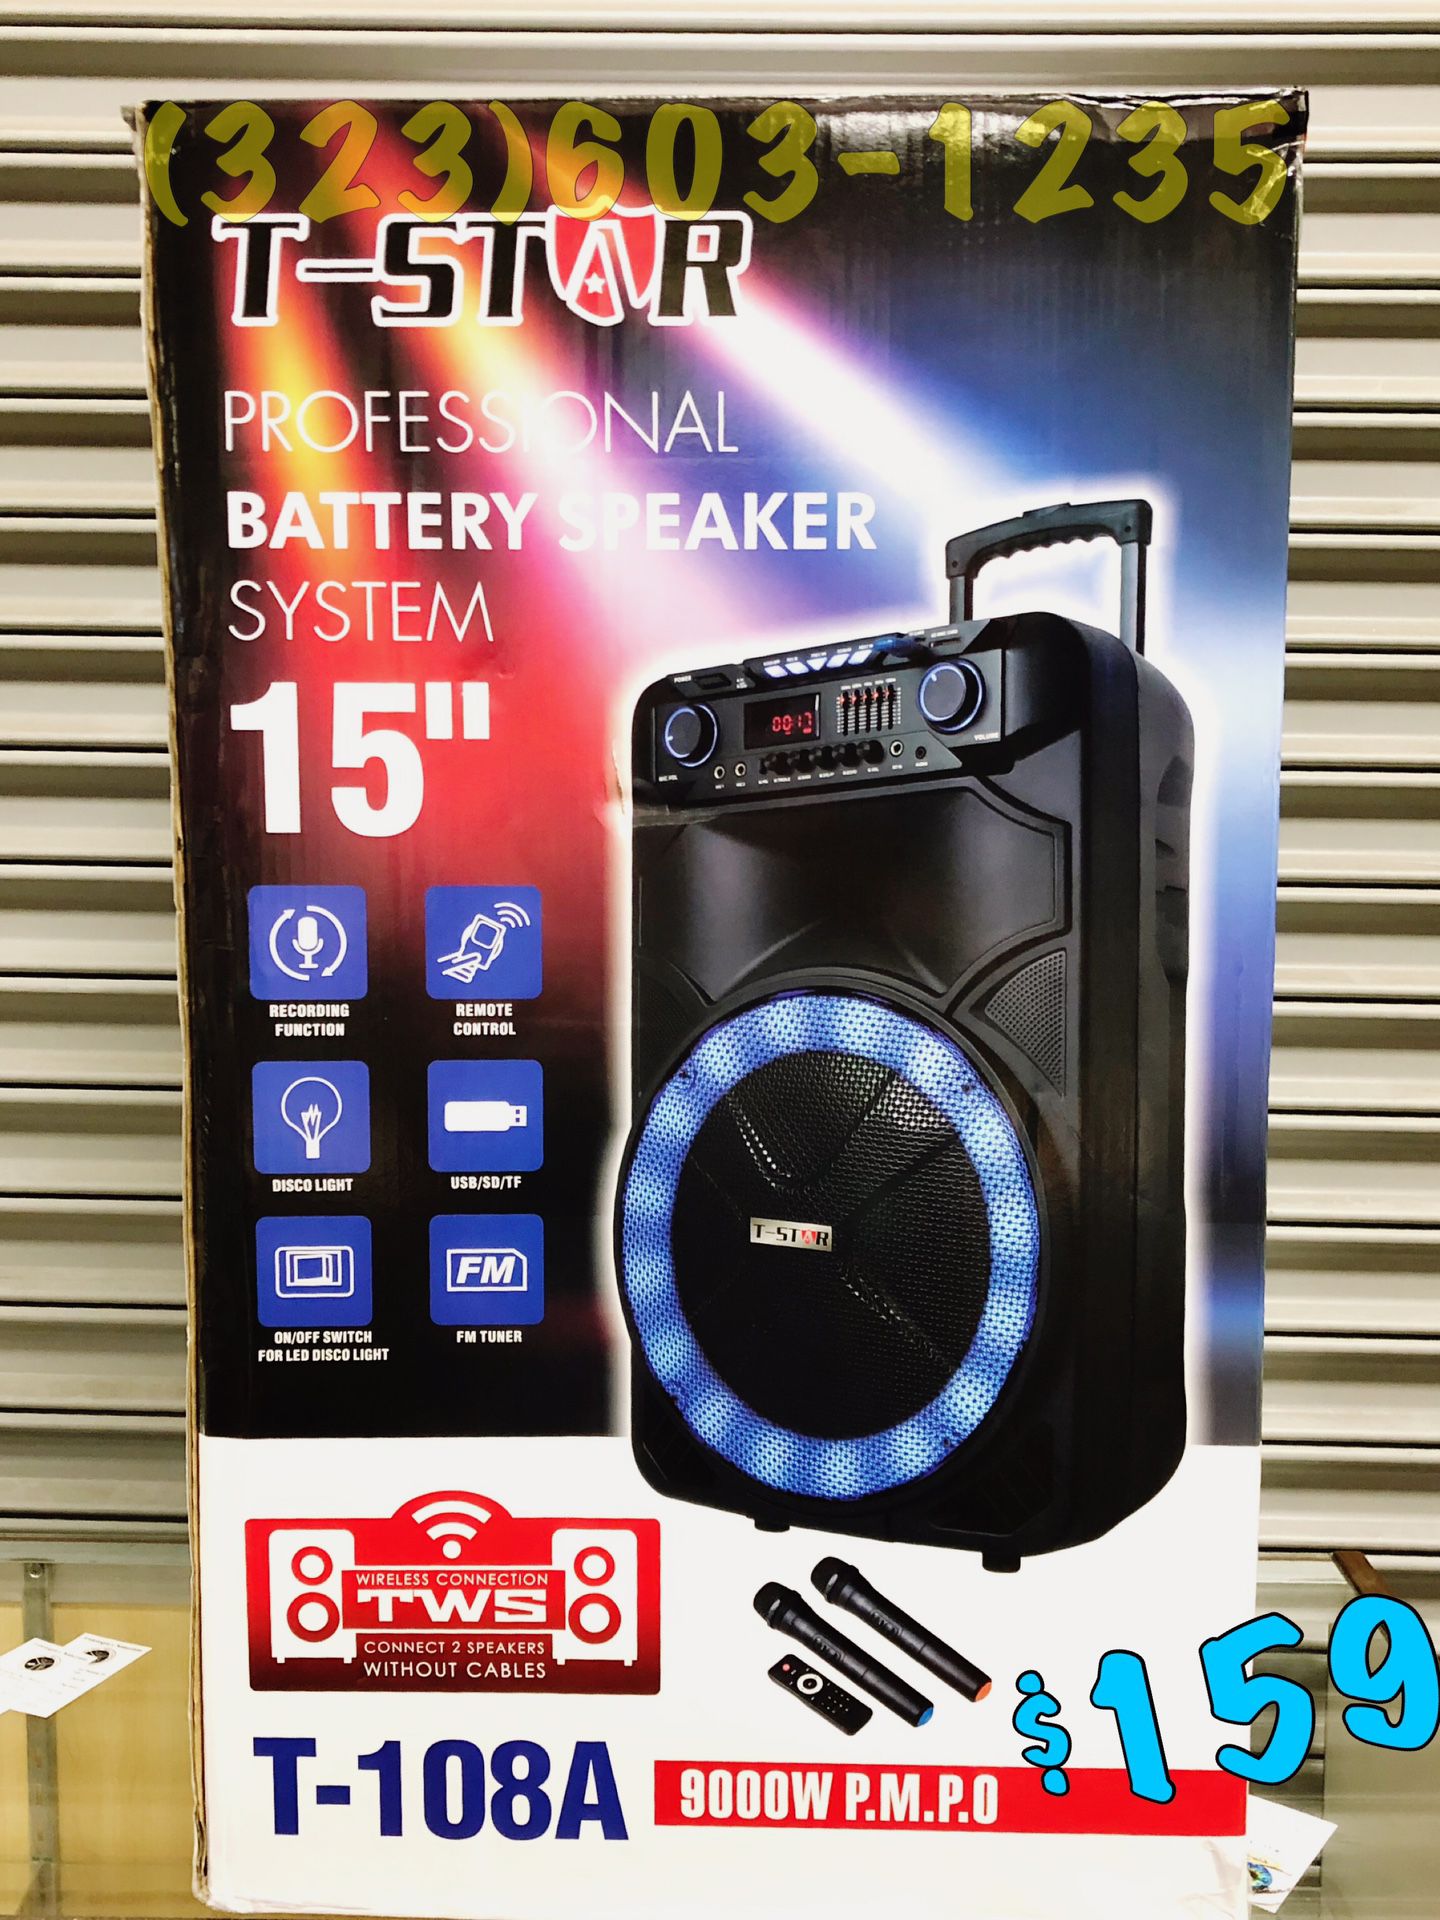 2 Wireless 🎤 Included • 9,000 Watts* BLUETOOTH Party Speaker • Loud • BASS • TWS NEW MODEL 💥 Mucho Party